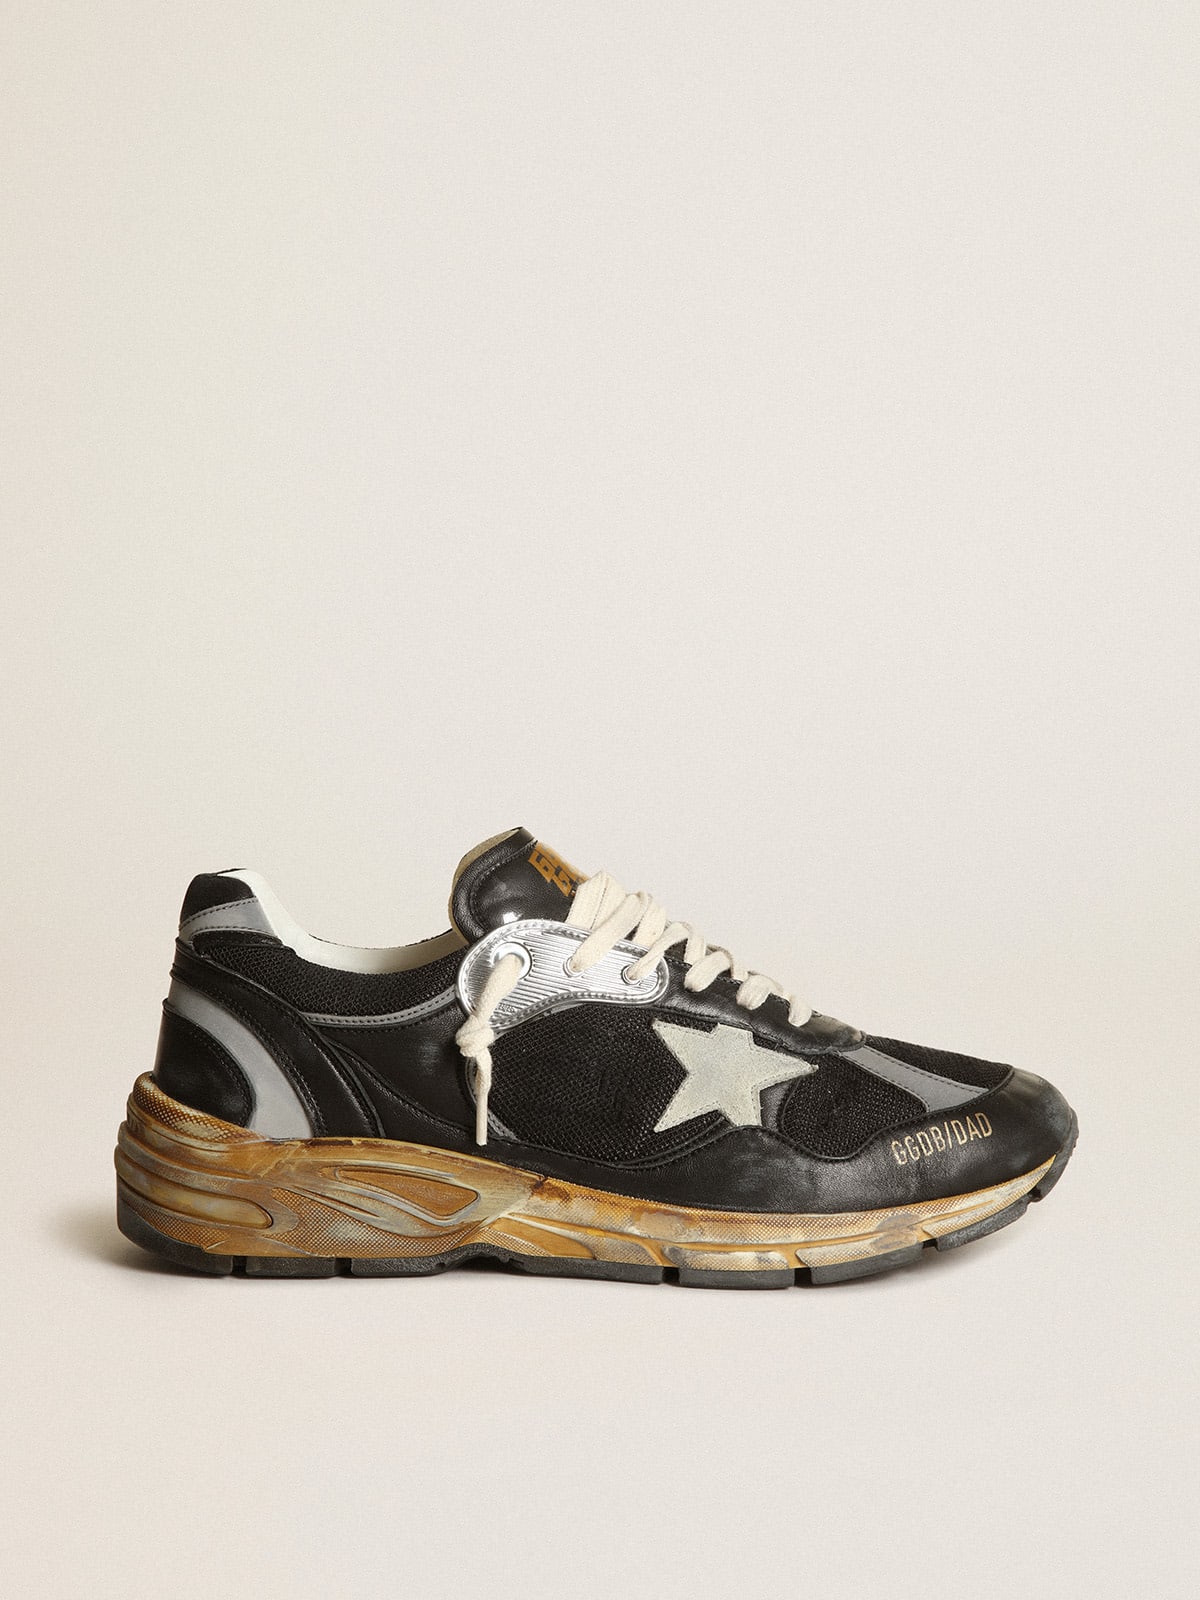 Men's Dad-Star sneakers in black mesh and nappa leather with ice-gray suede star